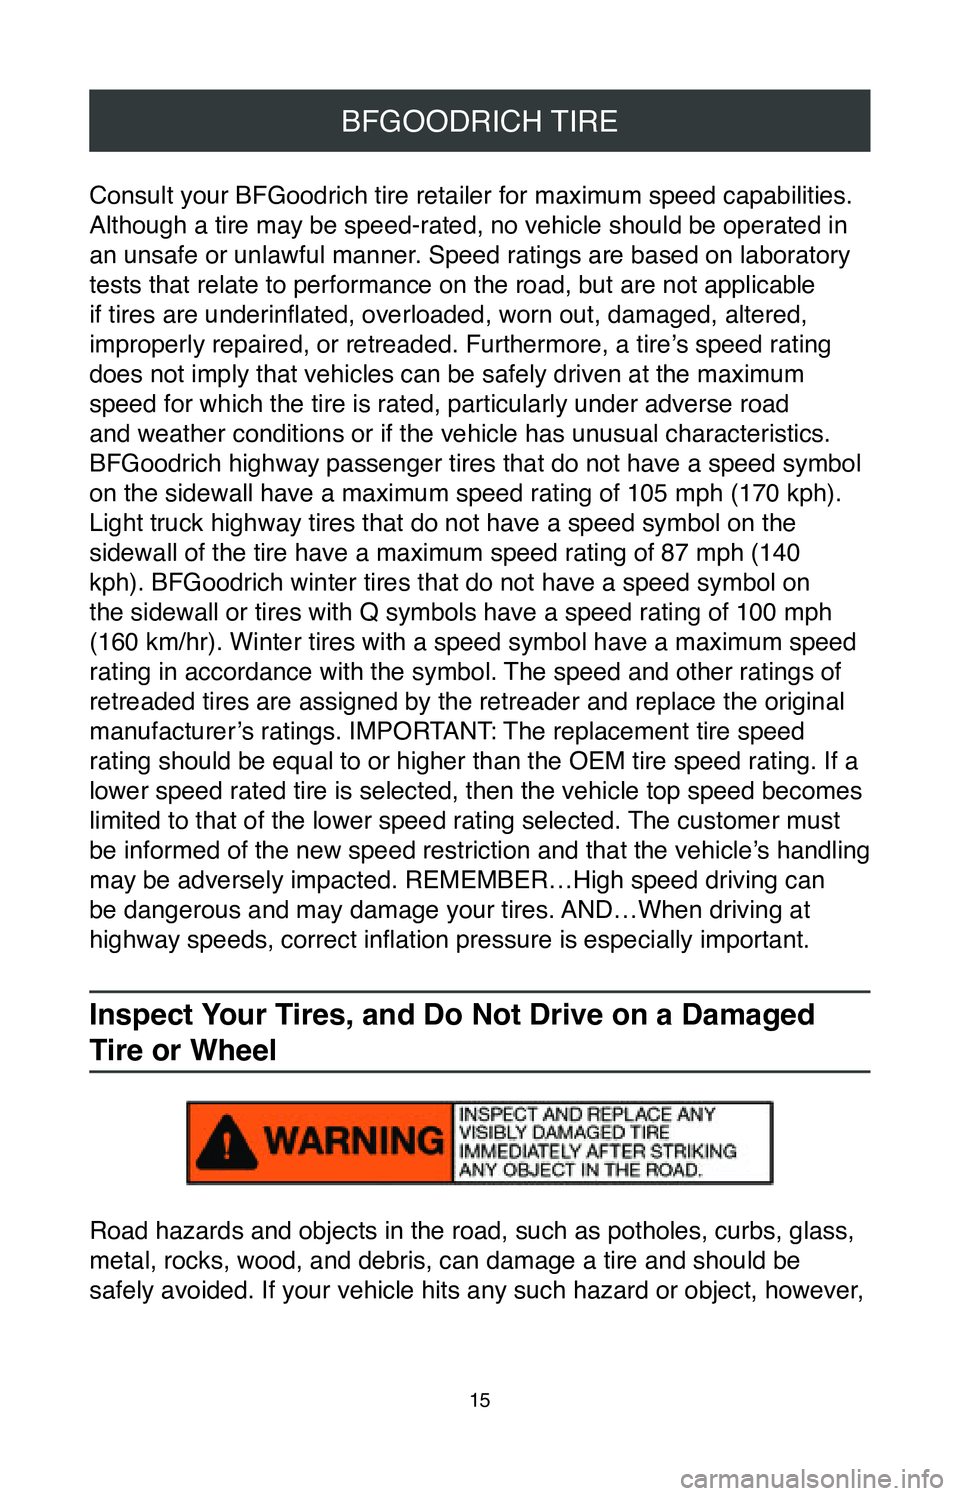 TOYOTA SUPRA 2020  Warranties & Maintenance Guides (in English) 15
BFGOODRICH TIRE
Consult your BFGoodrich tire retailer for maximum speed capabilities. 
Although a tire may be speed-rated, no vehicle should be operated in 
an unsafe or unlawful manner. Speed rati